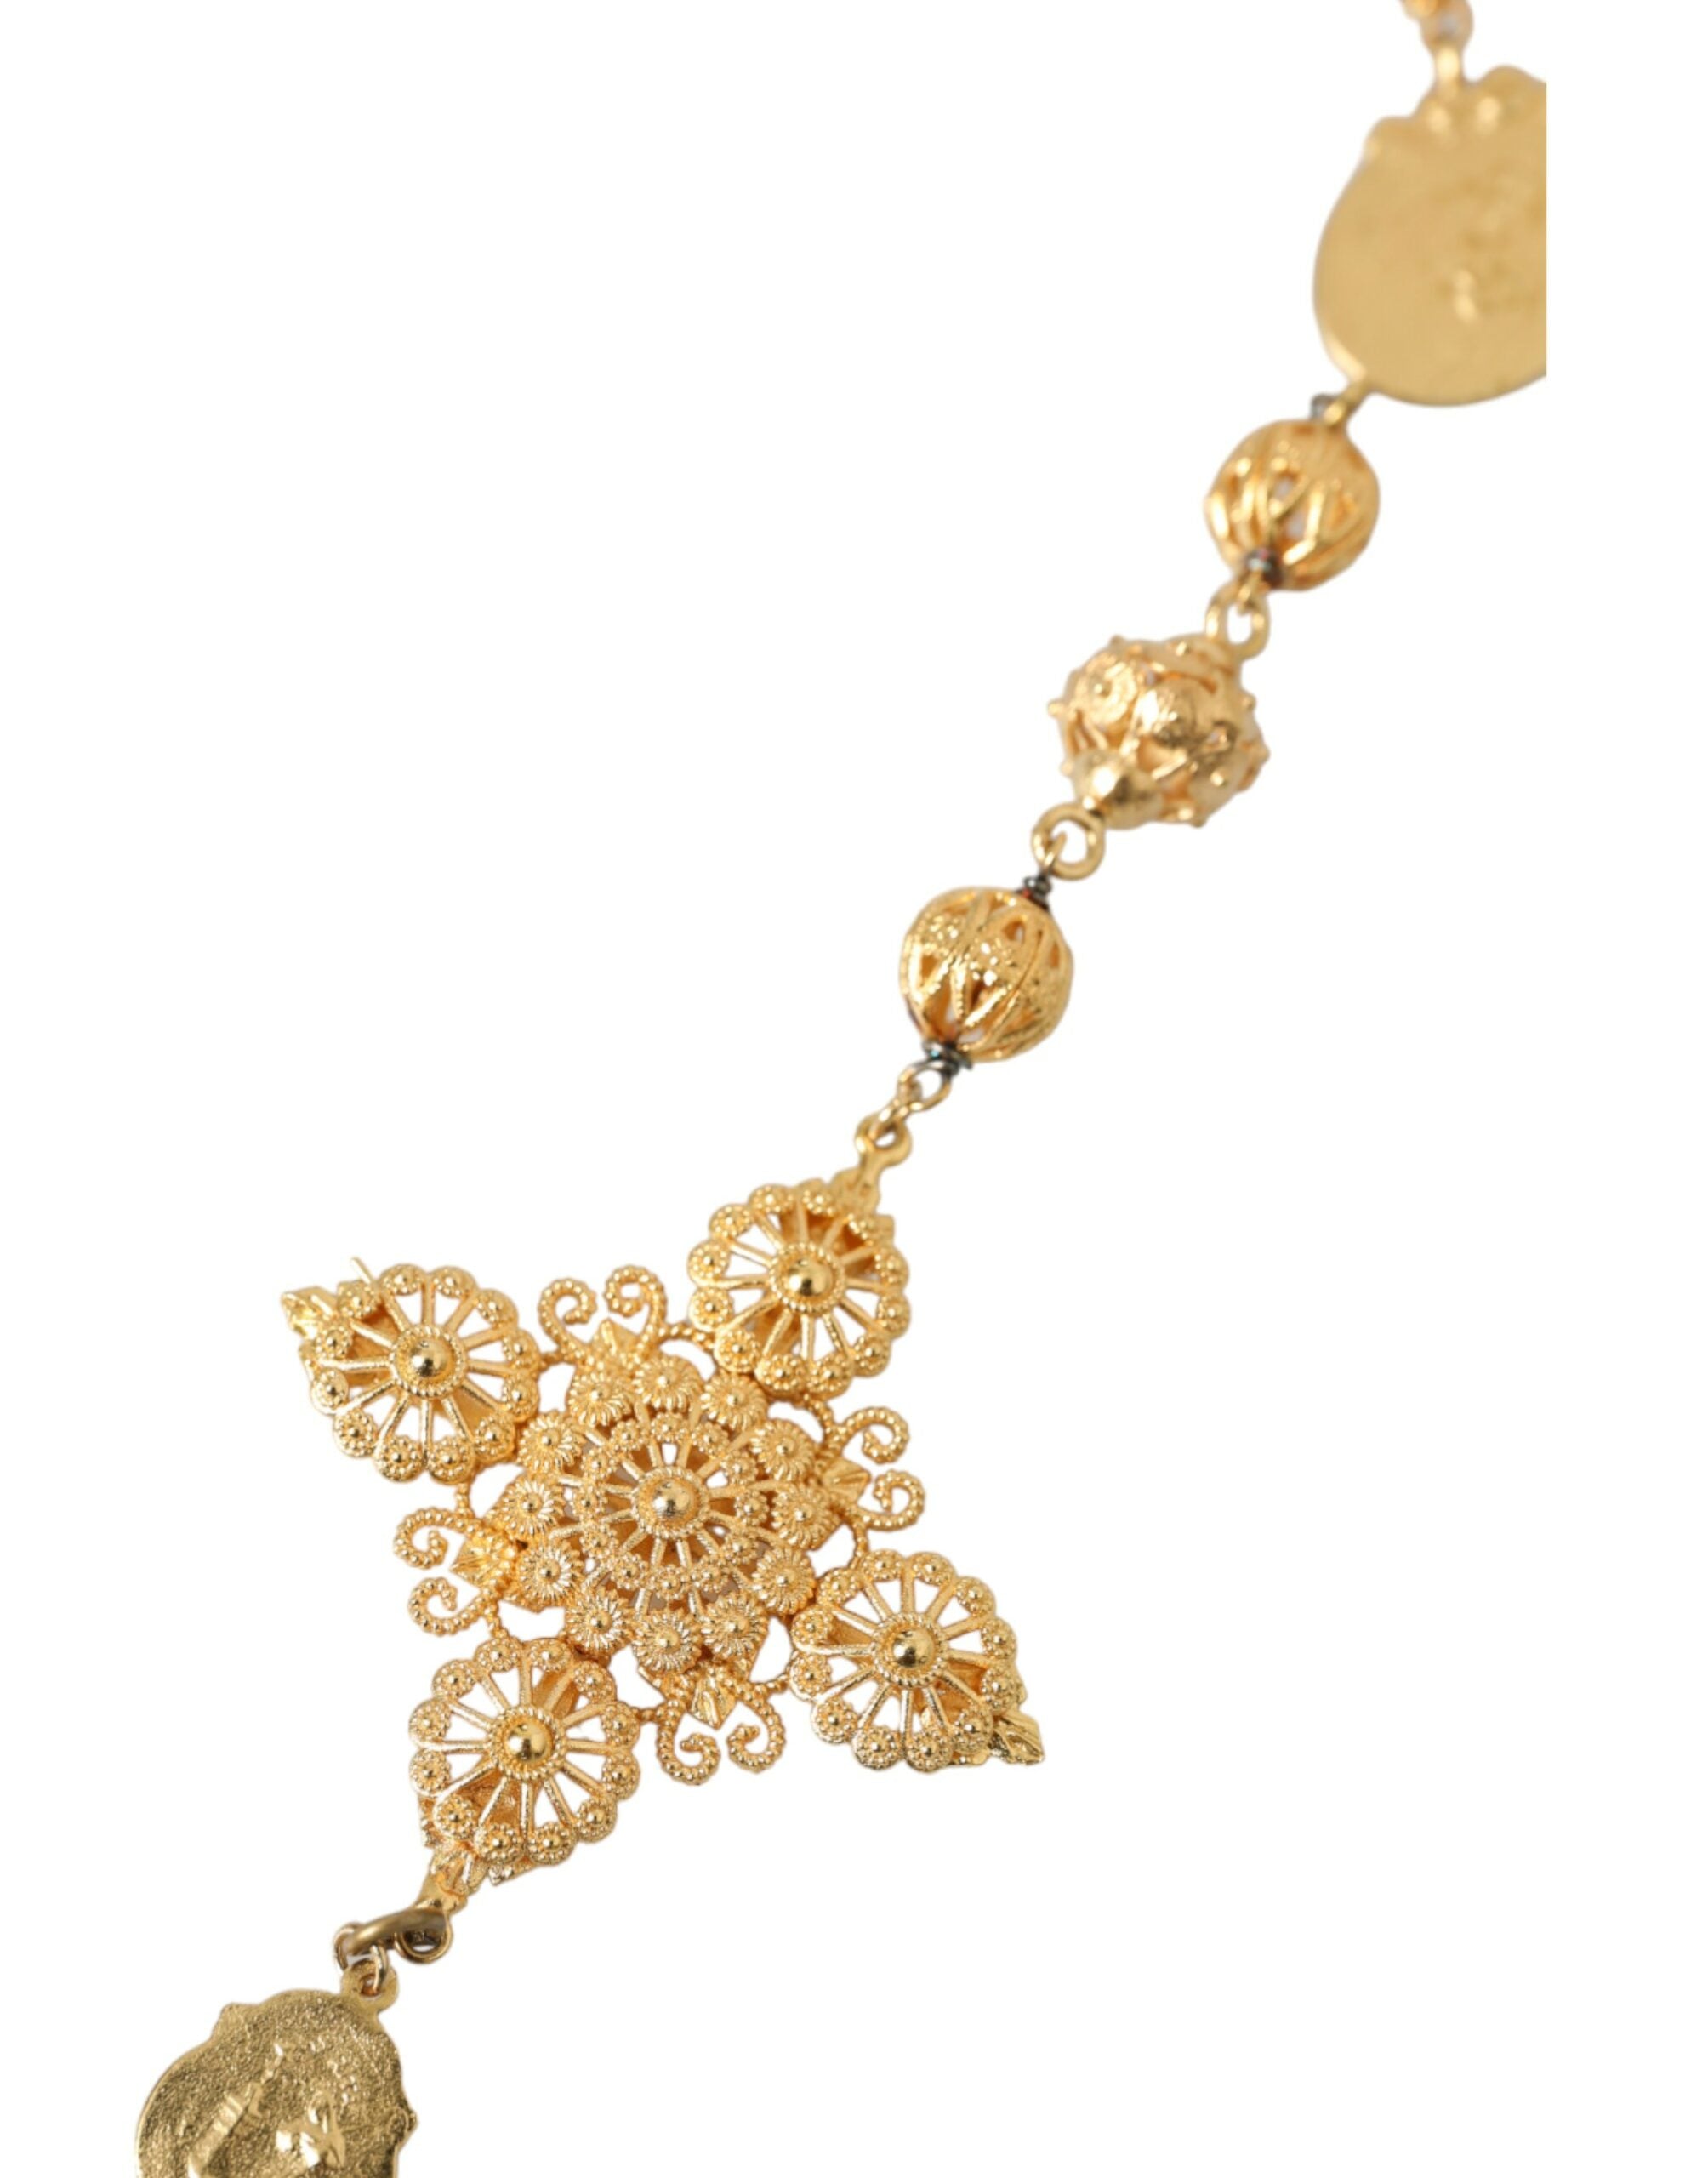 Gold Tone Chain Brass Beaded Statement Sicily Necklace - Divitiae Glamour